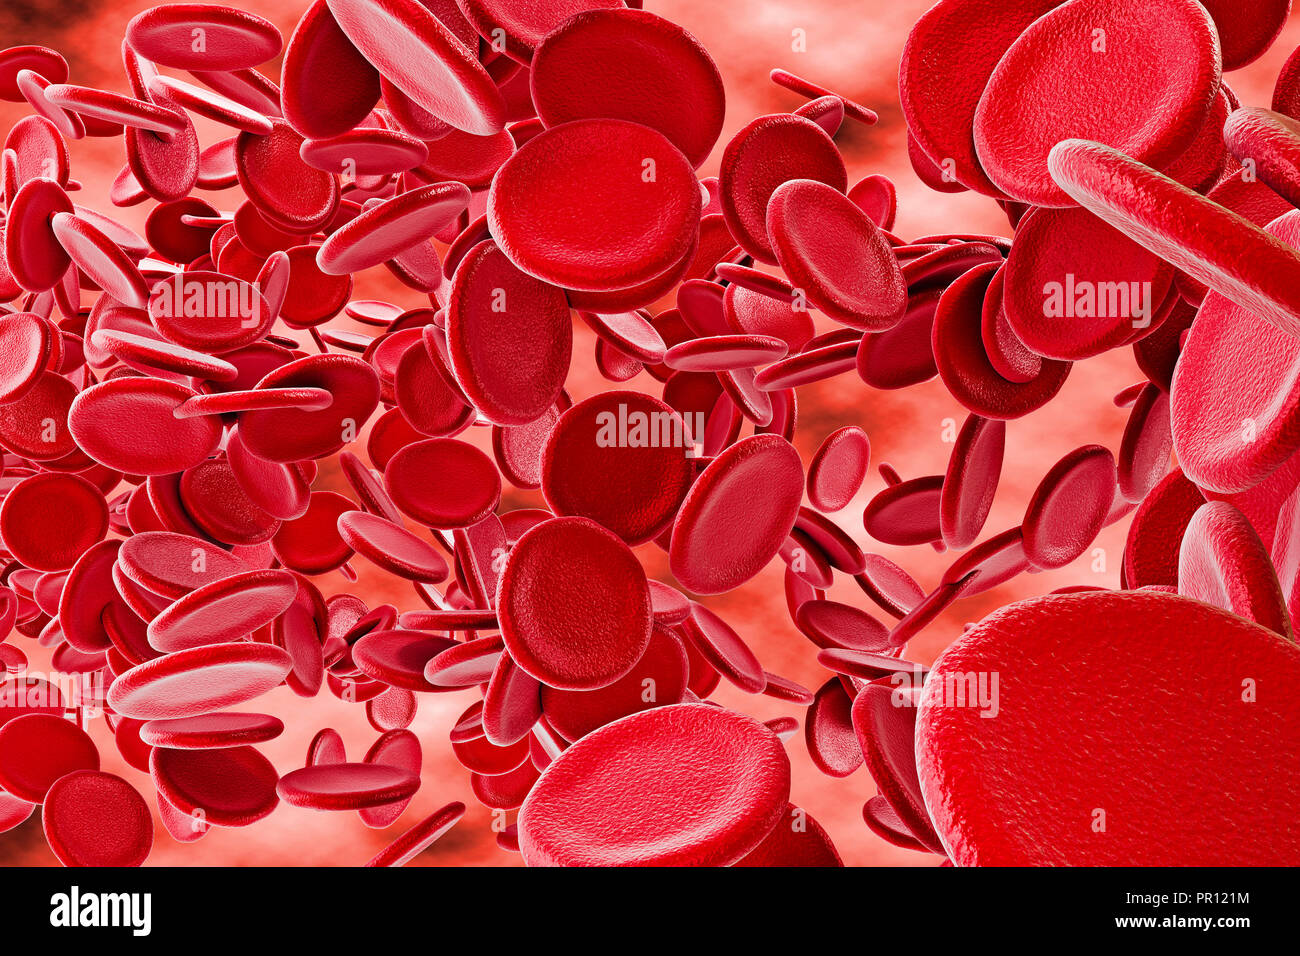 3d red blood cells Stock Photo